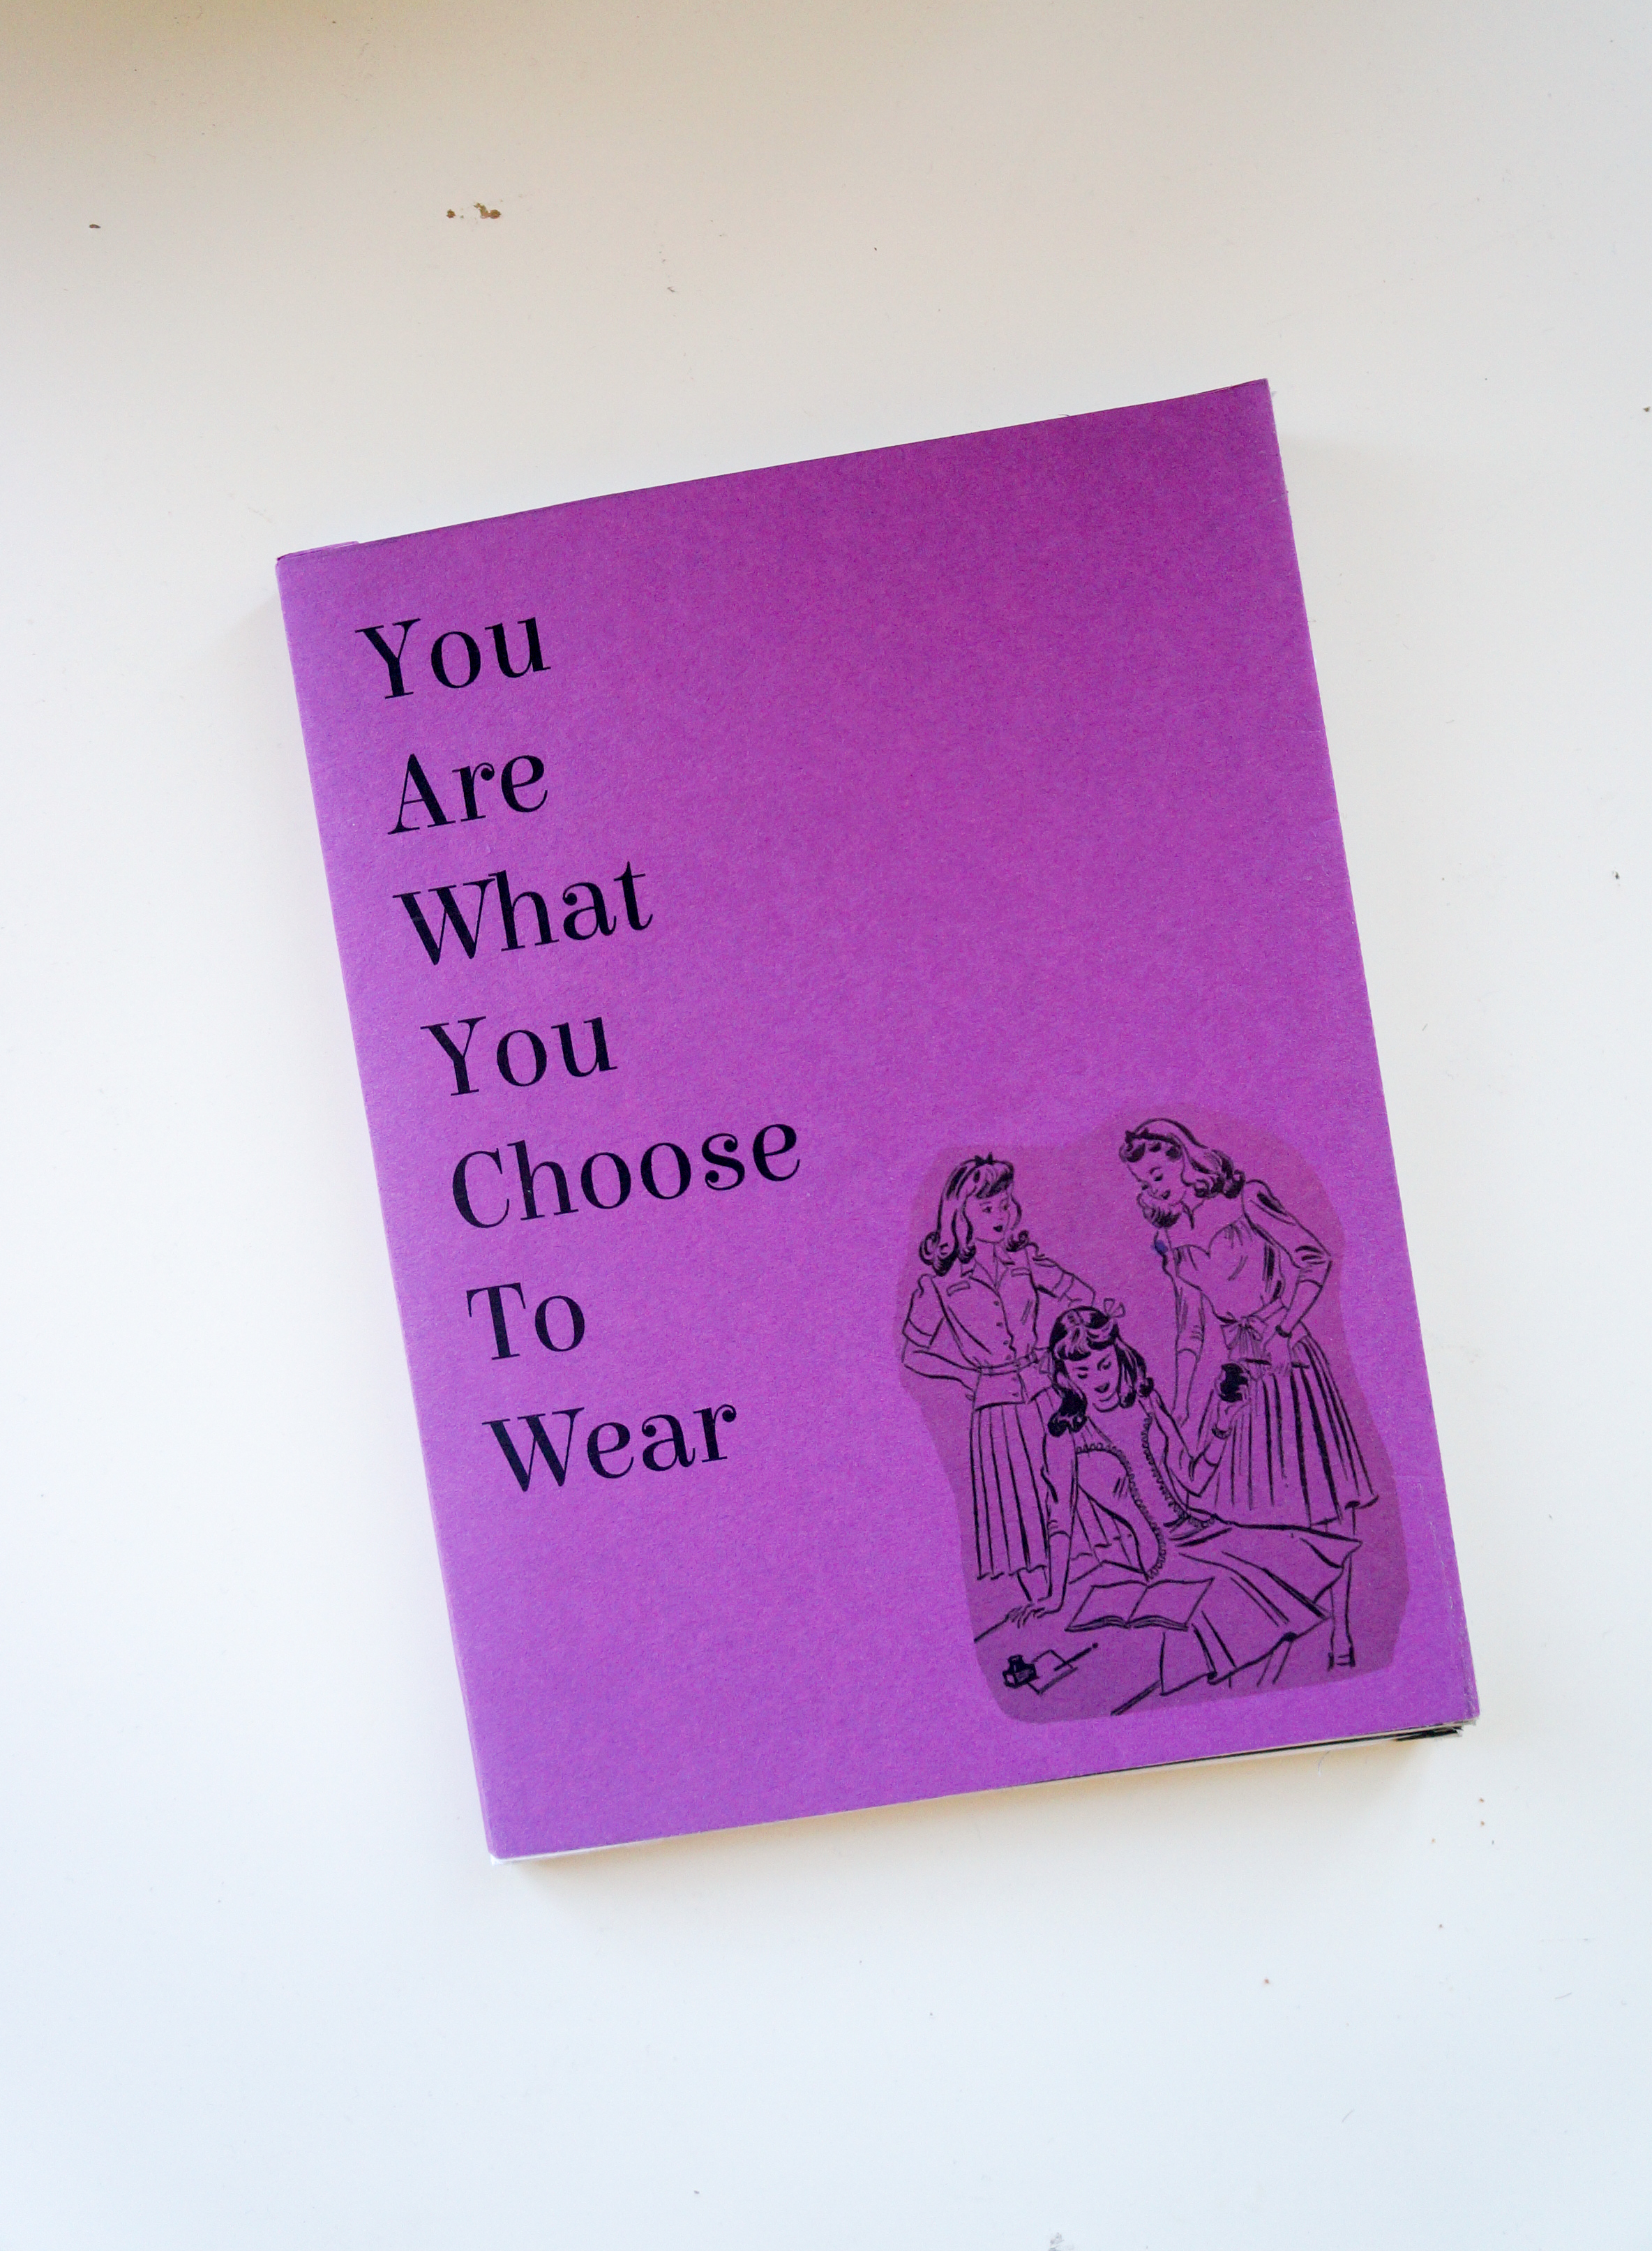 Cover of Matsumura's publication "You Are What You Choose To Wear"